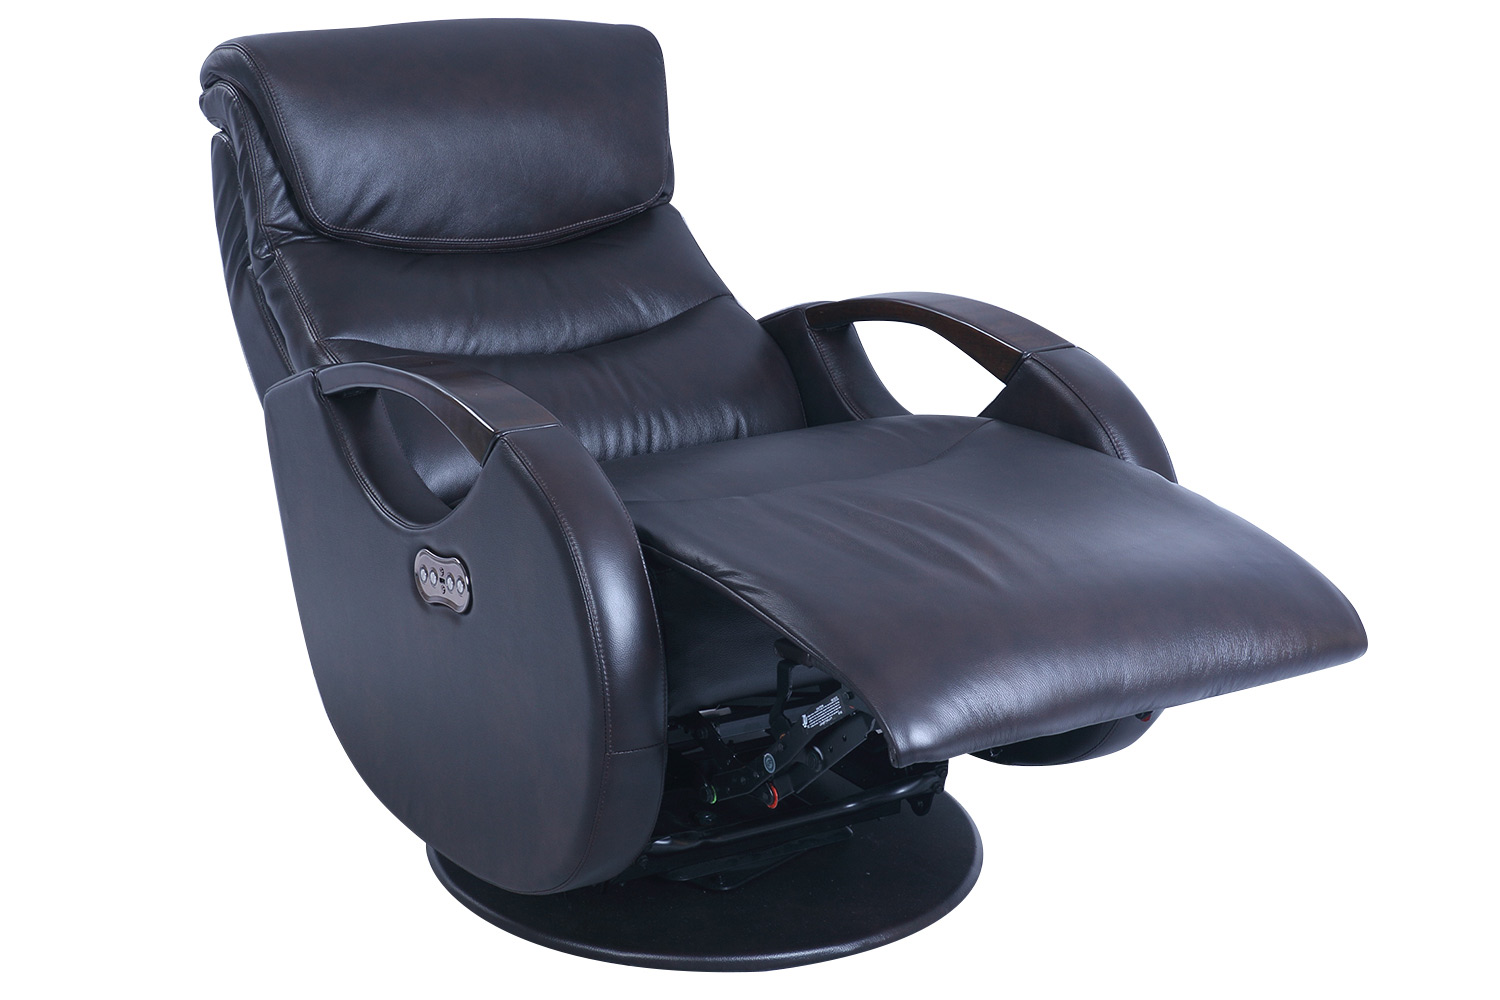 Barcalounger Rico Swivel Glider Power Recliner Chair with Power Head Rest - Dobson Chocolate/Leather Match